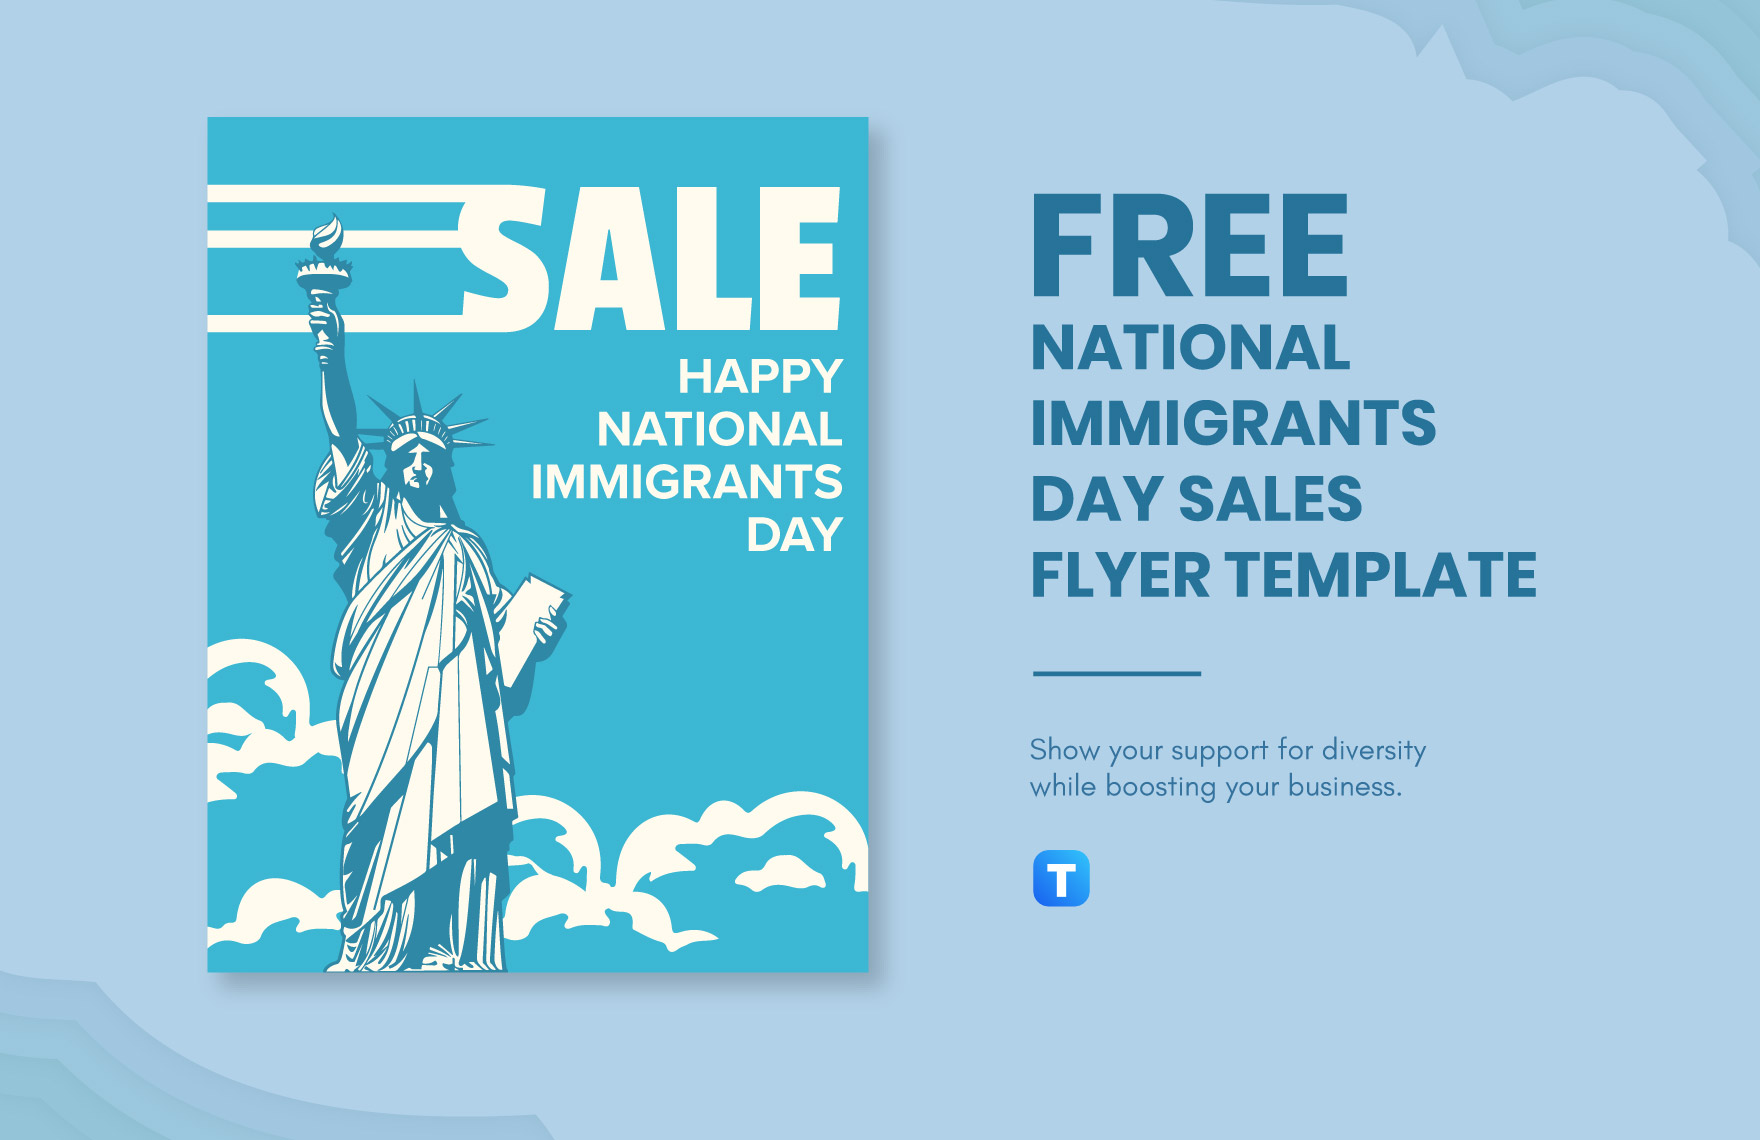 National Immigrants Day Sales Flyer